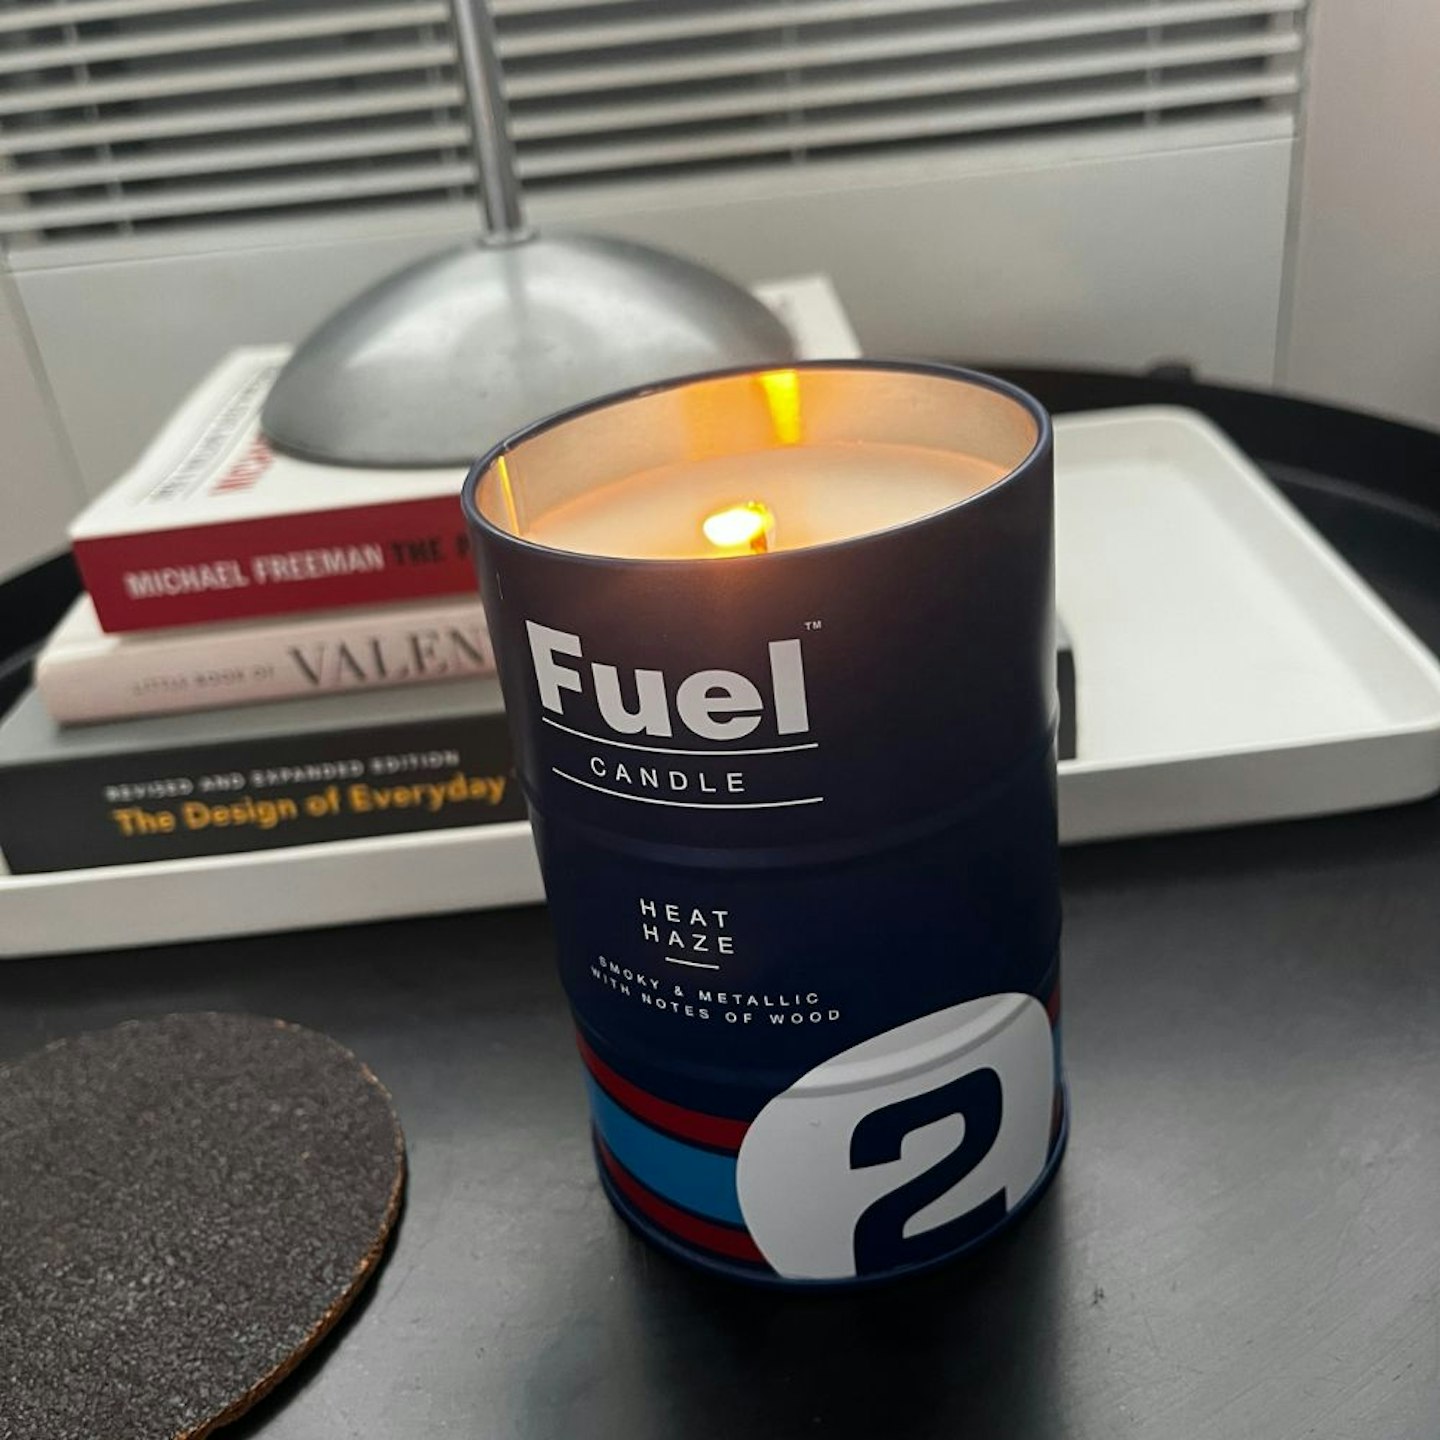 The Luckies of London Fuel Candle on test 